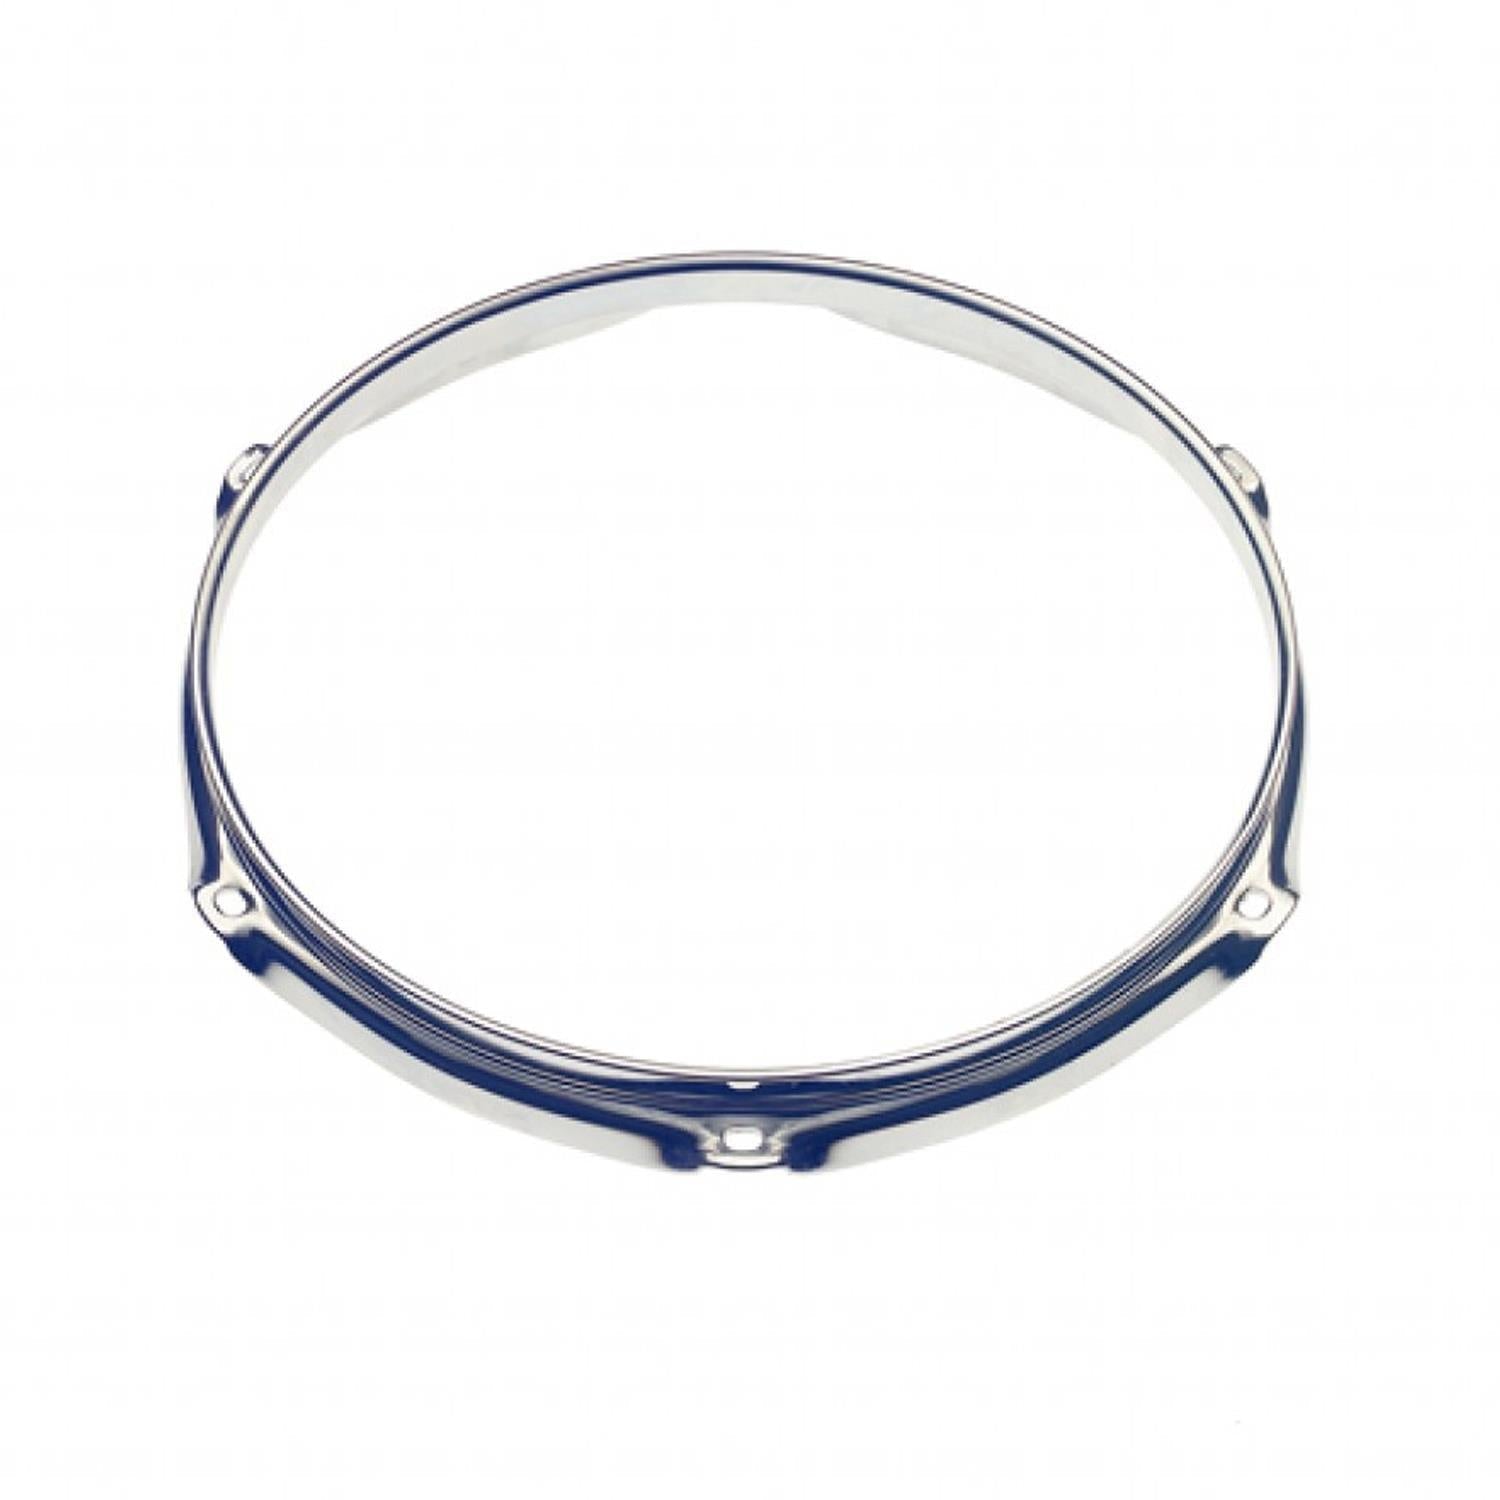 Stagg KT316-8 Drum Hoop 16" x 8 lug - DY Pro Audio